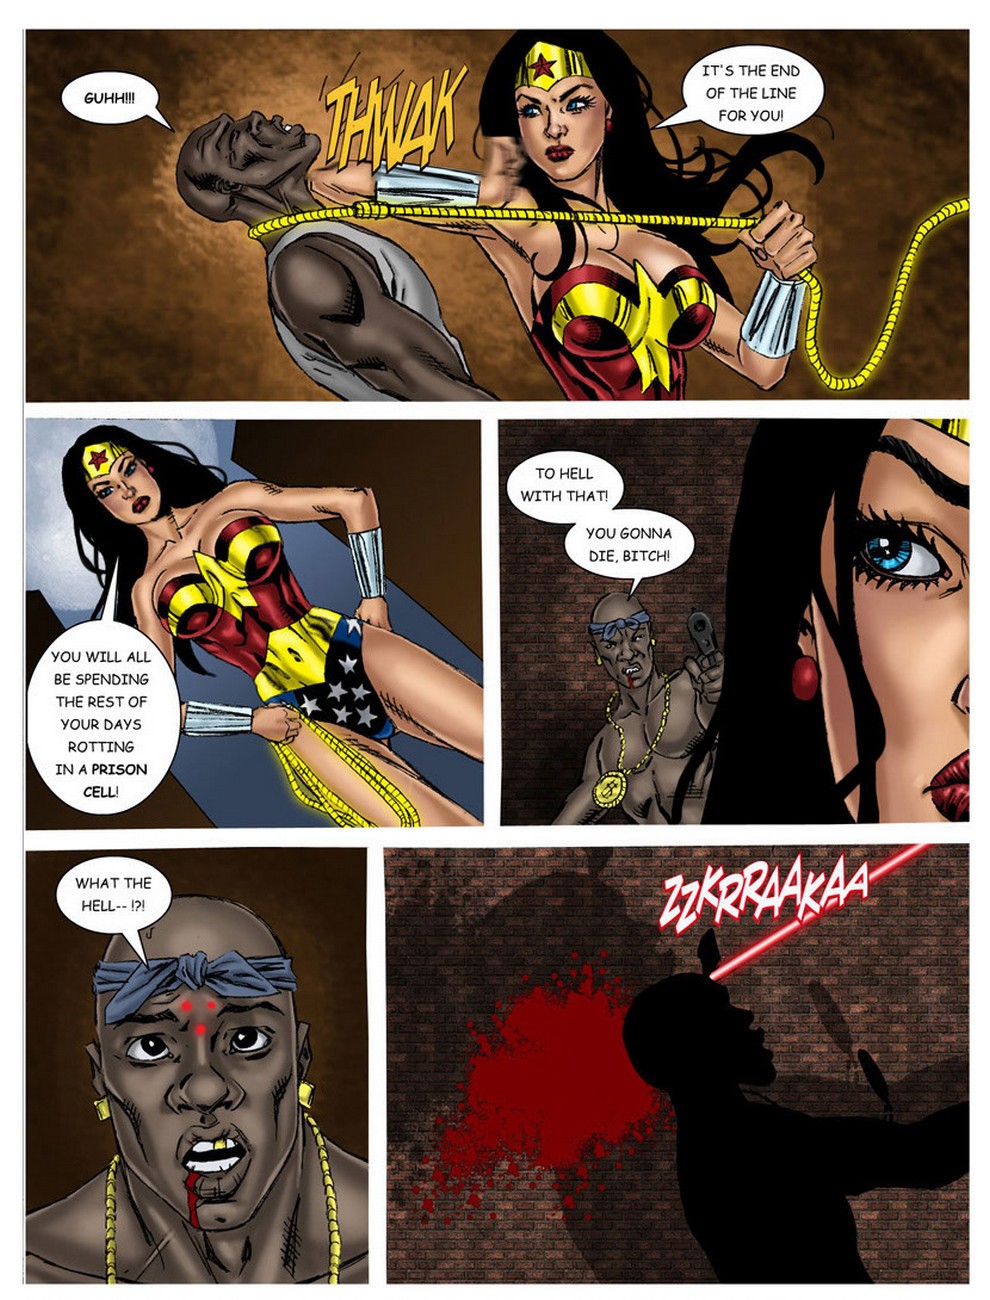 Read Wonder Woman In The Clutches Of The Predator 1 Hentai Online Porn Manga And Doujinshi